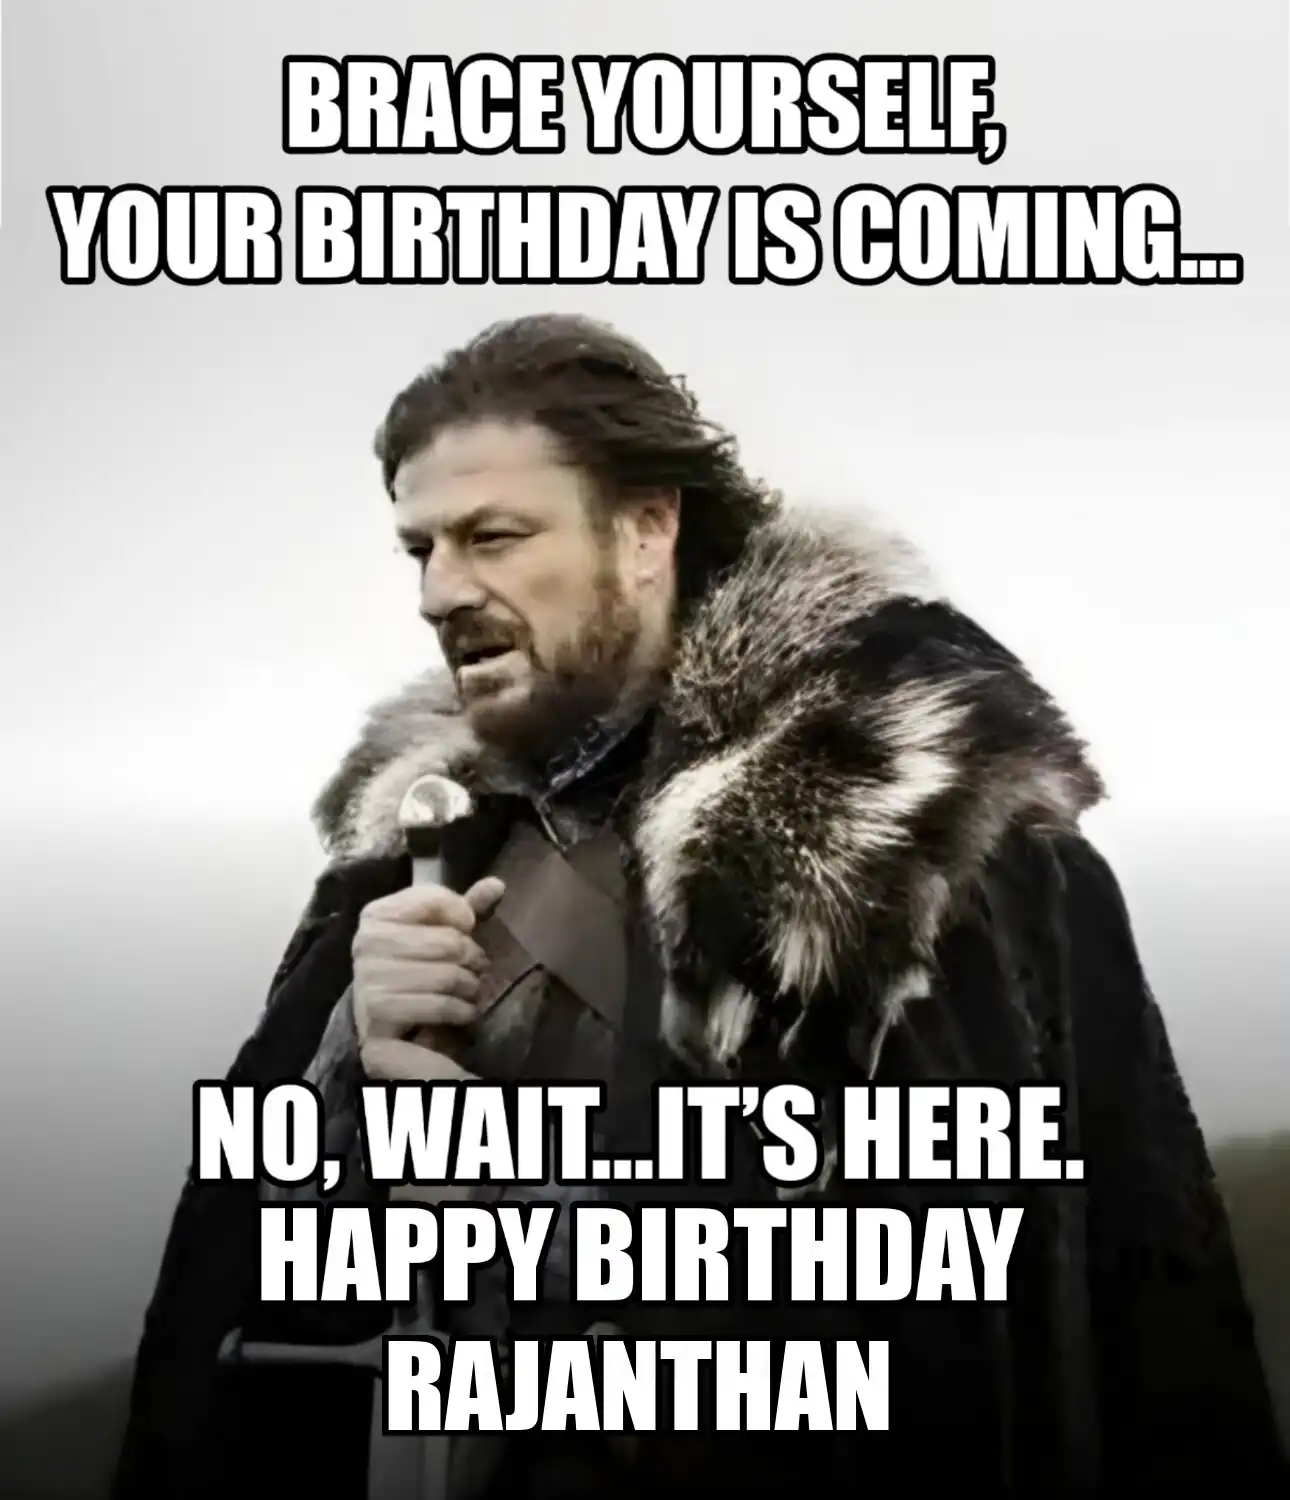 Happy Birthday Rajanthan Brace Yourself Your Birthday Is Coming Meme